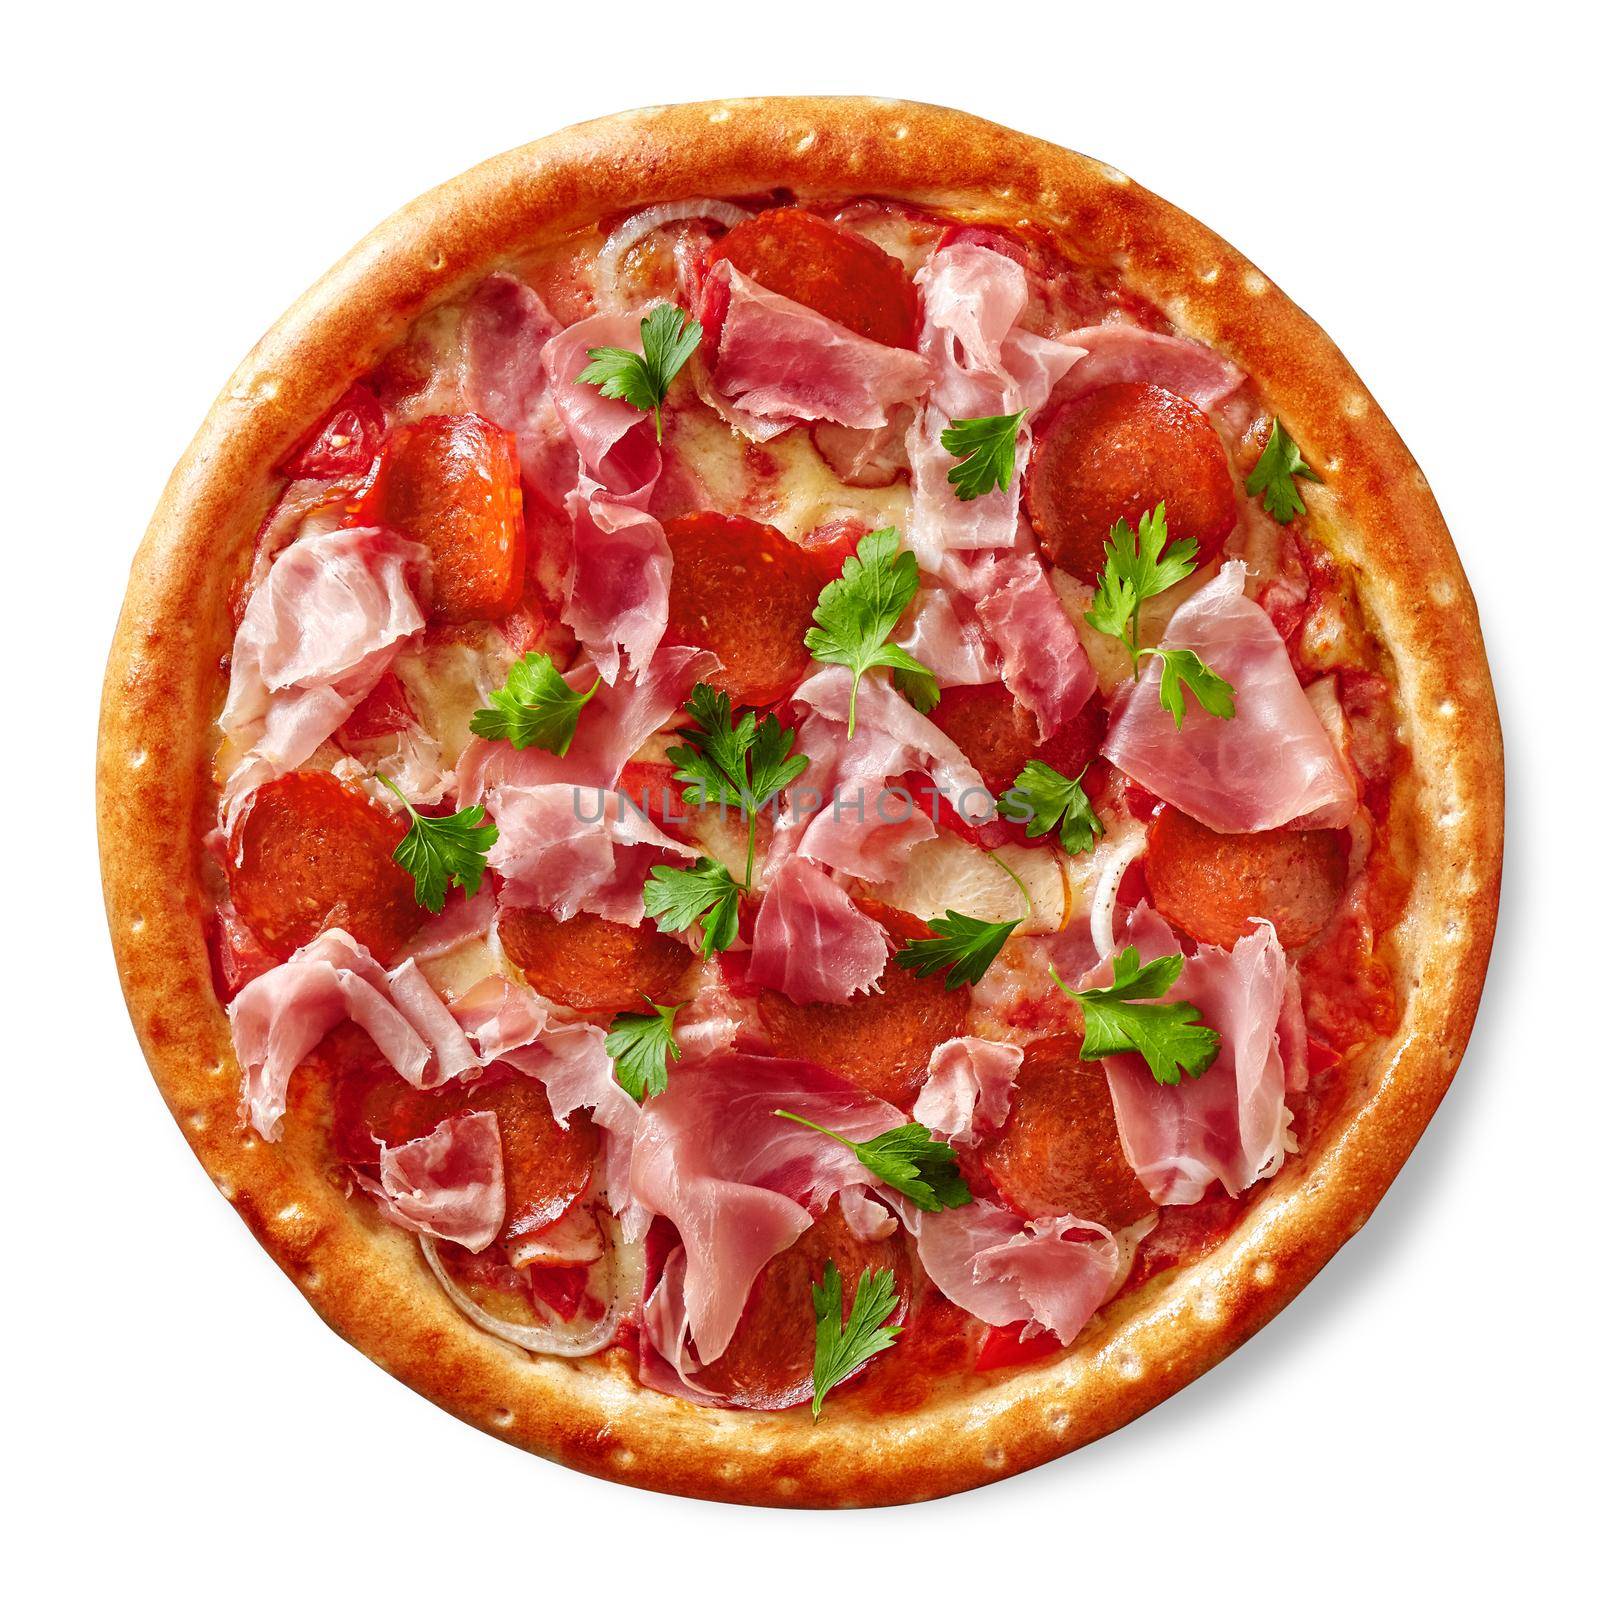 Top view of meat pizza with pelati tomato sauce, mozzarella cheese and filling of salami, smoked chicken, ham and prosciutto slices garnished with fresh parsley leaves isolated on white background